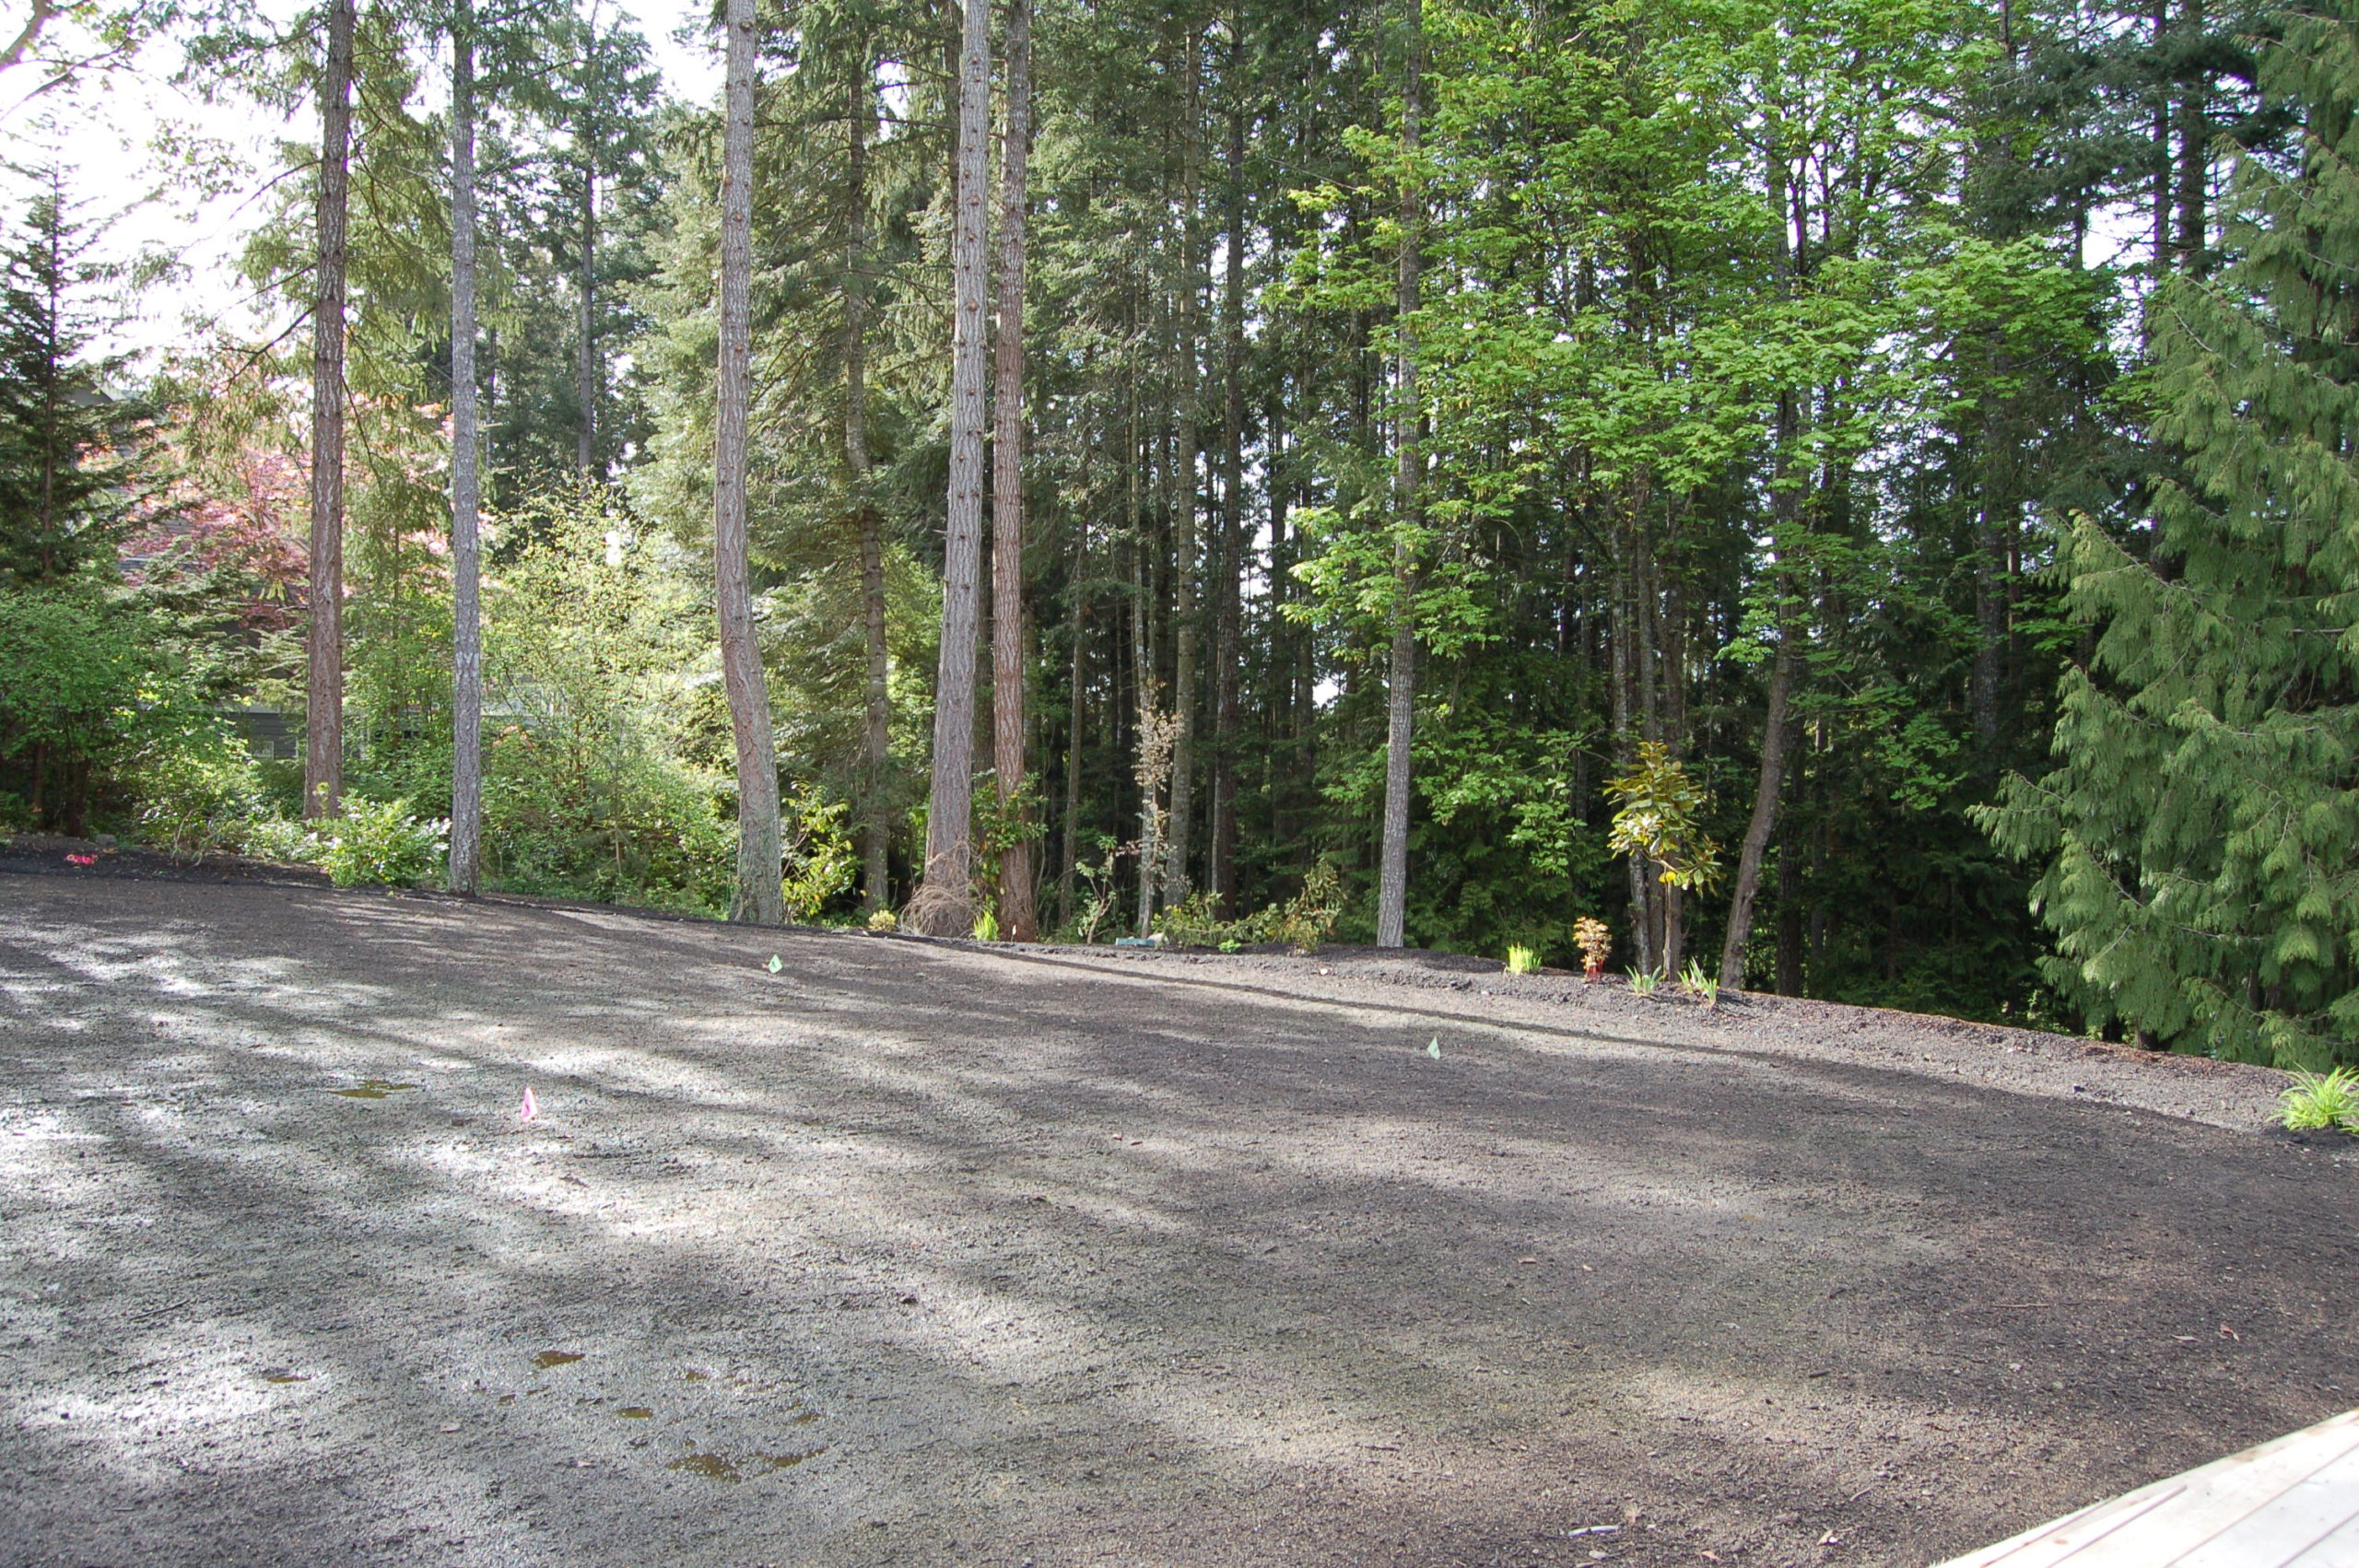 Ready to seed or sod - tufturf Victoria BC